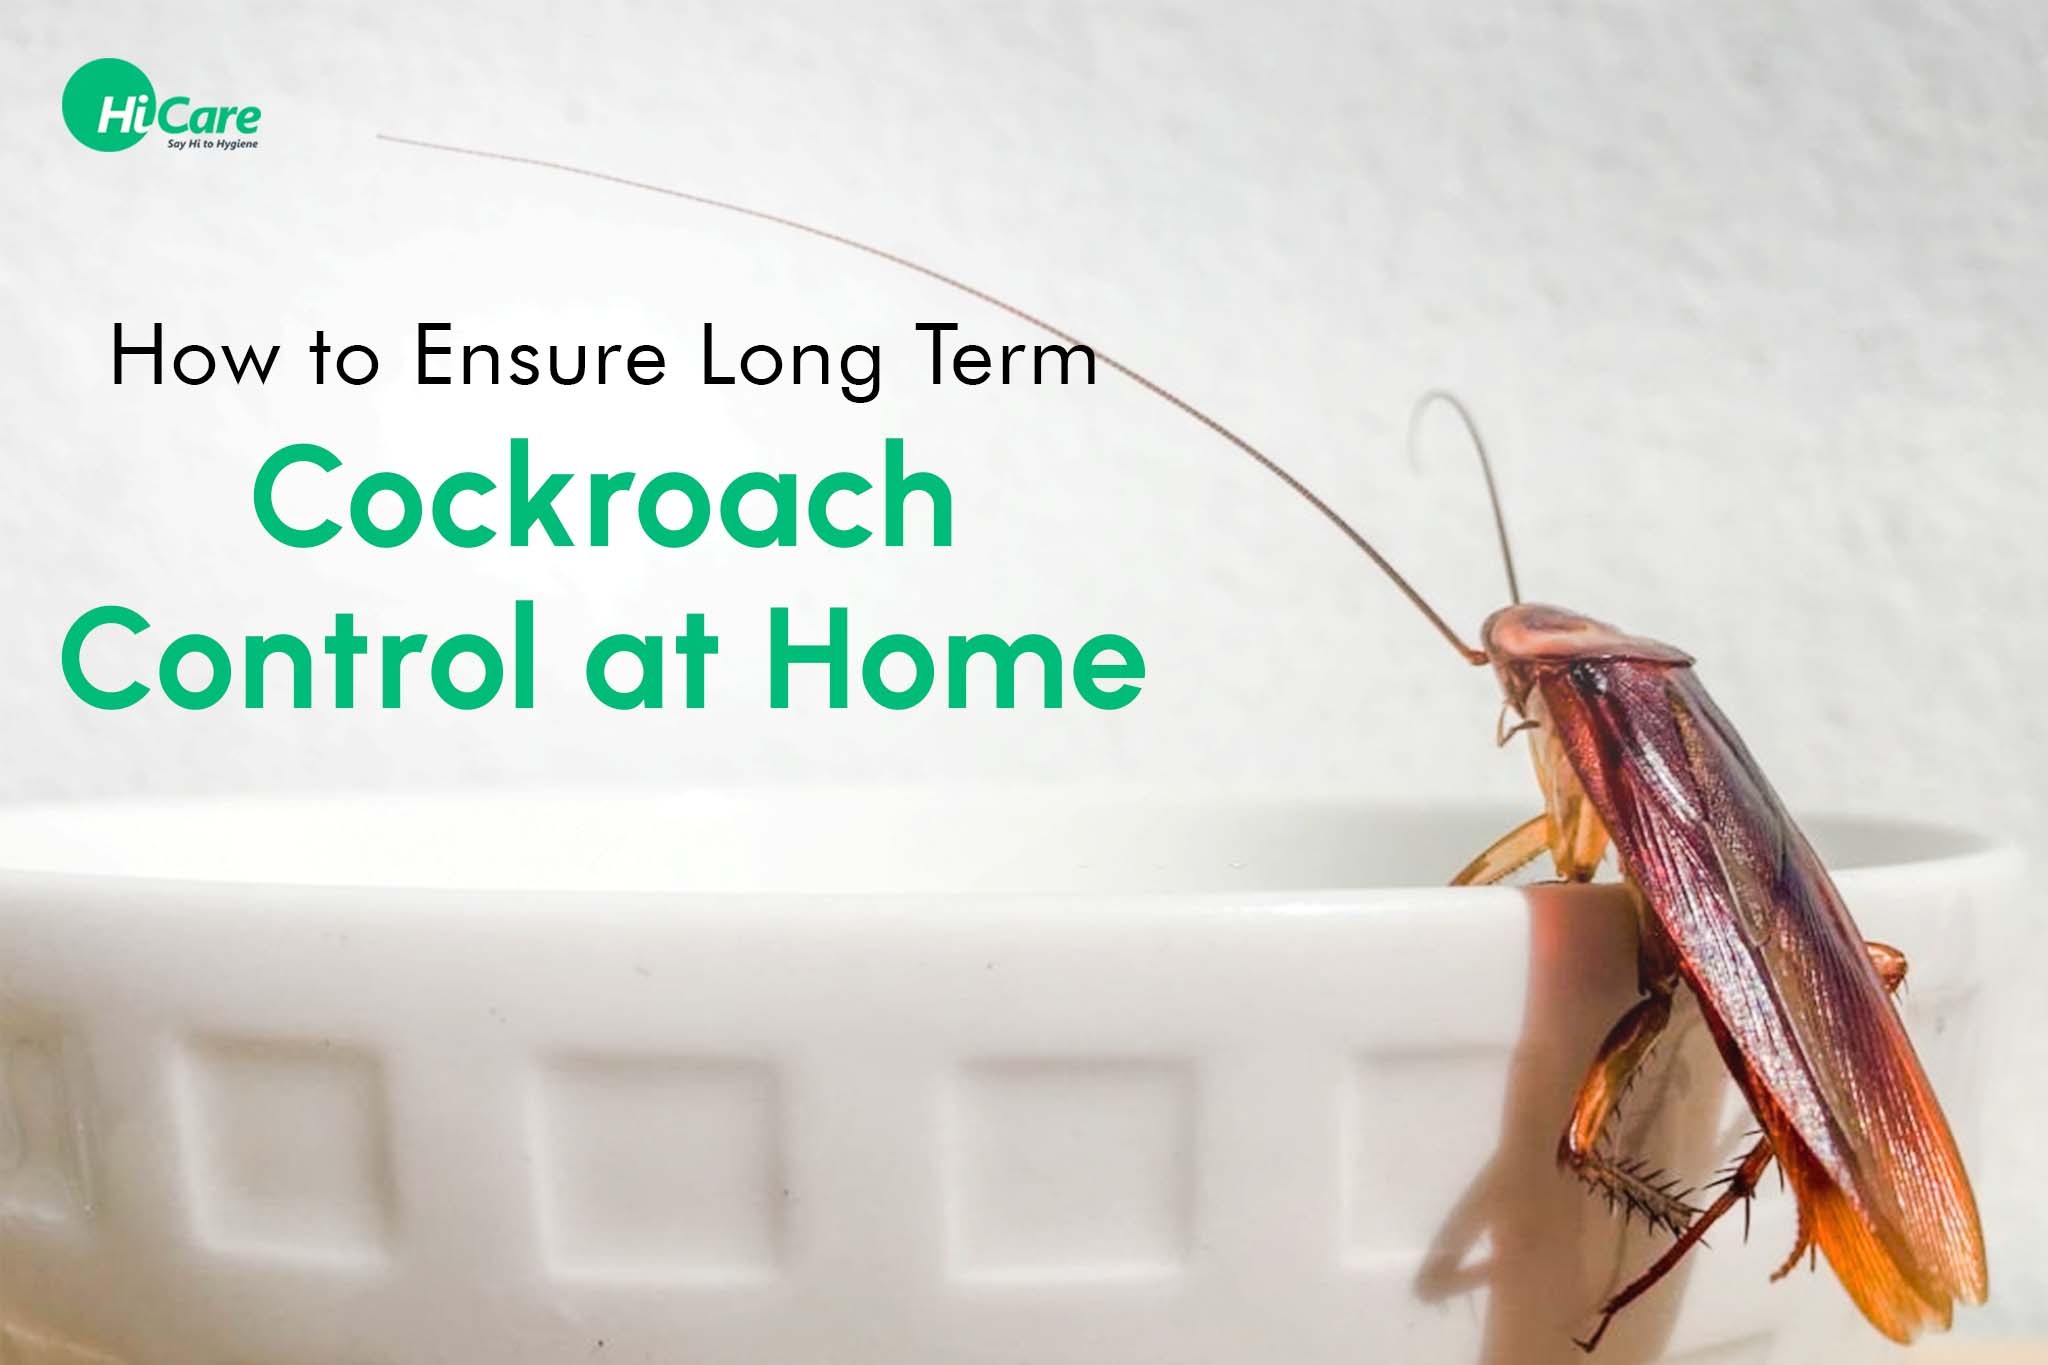 How to Ensure Long-Term Cockroach Control at Home